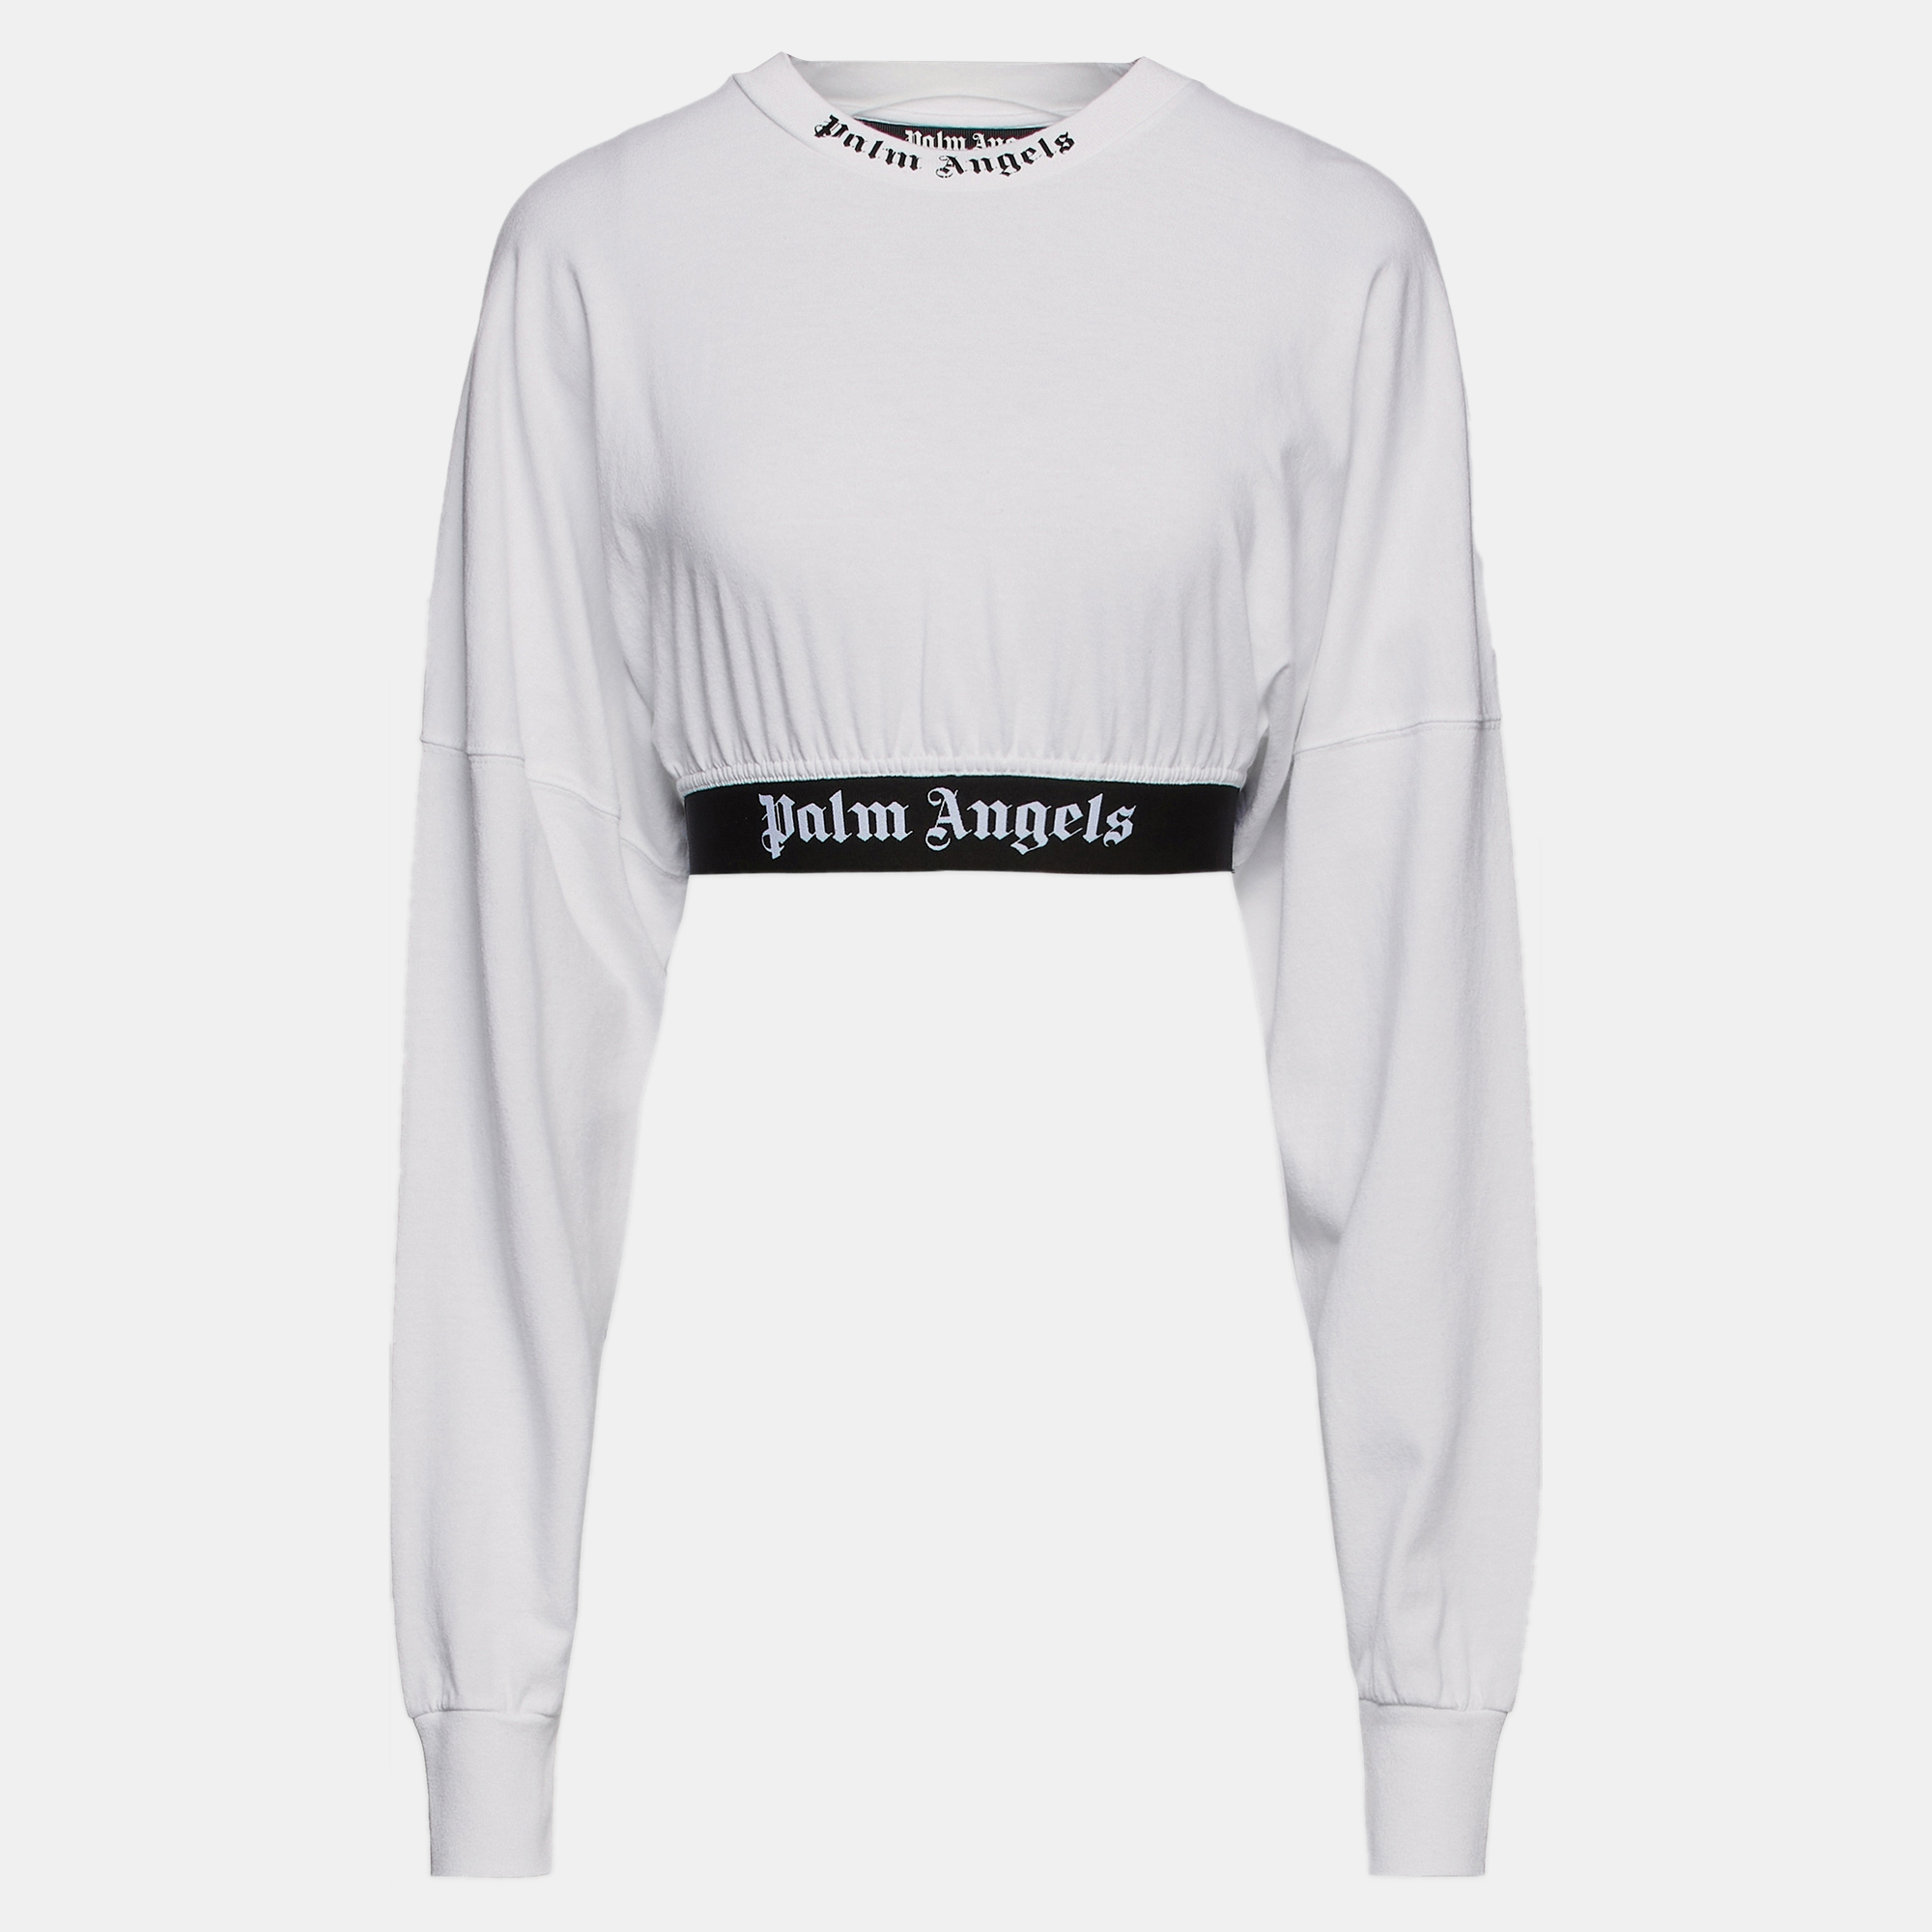 Palm angels cotton long sleeved top xs